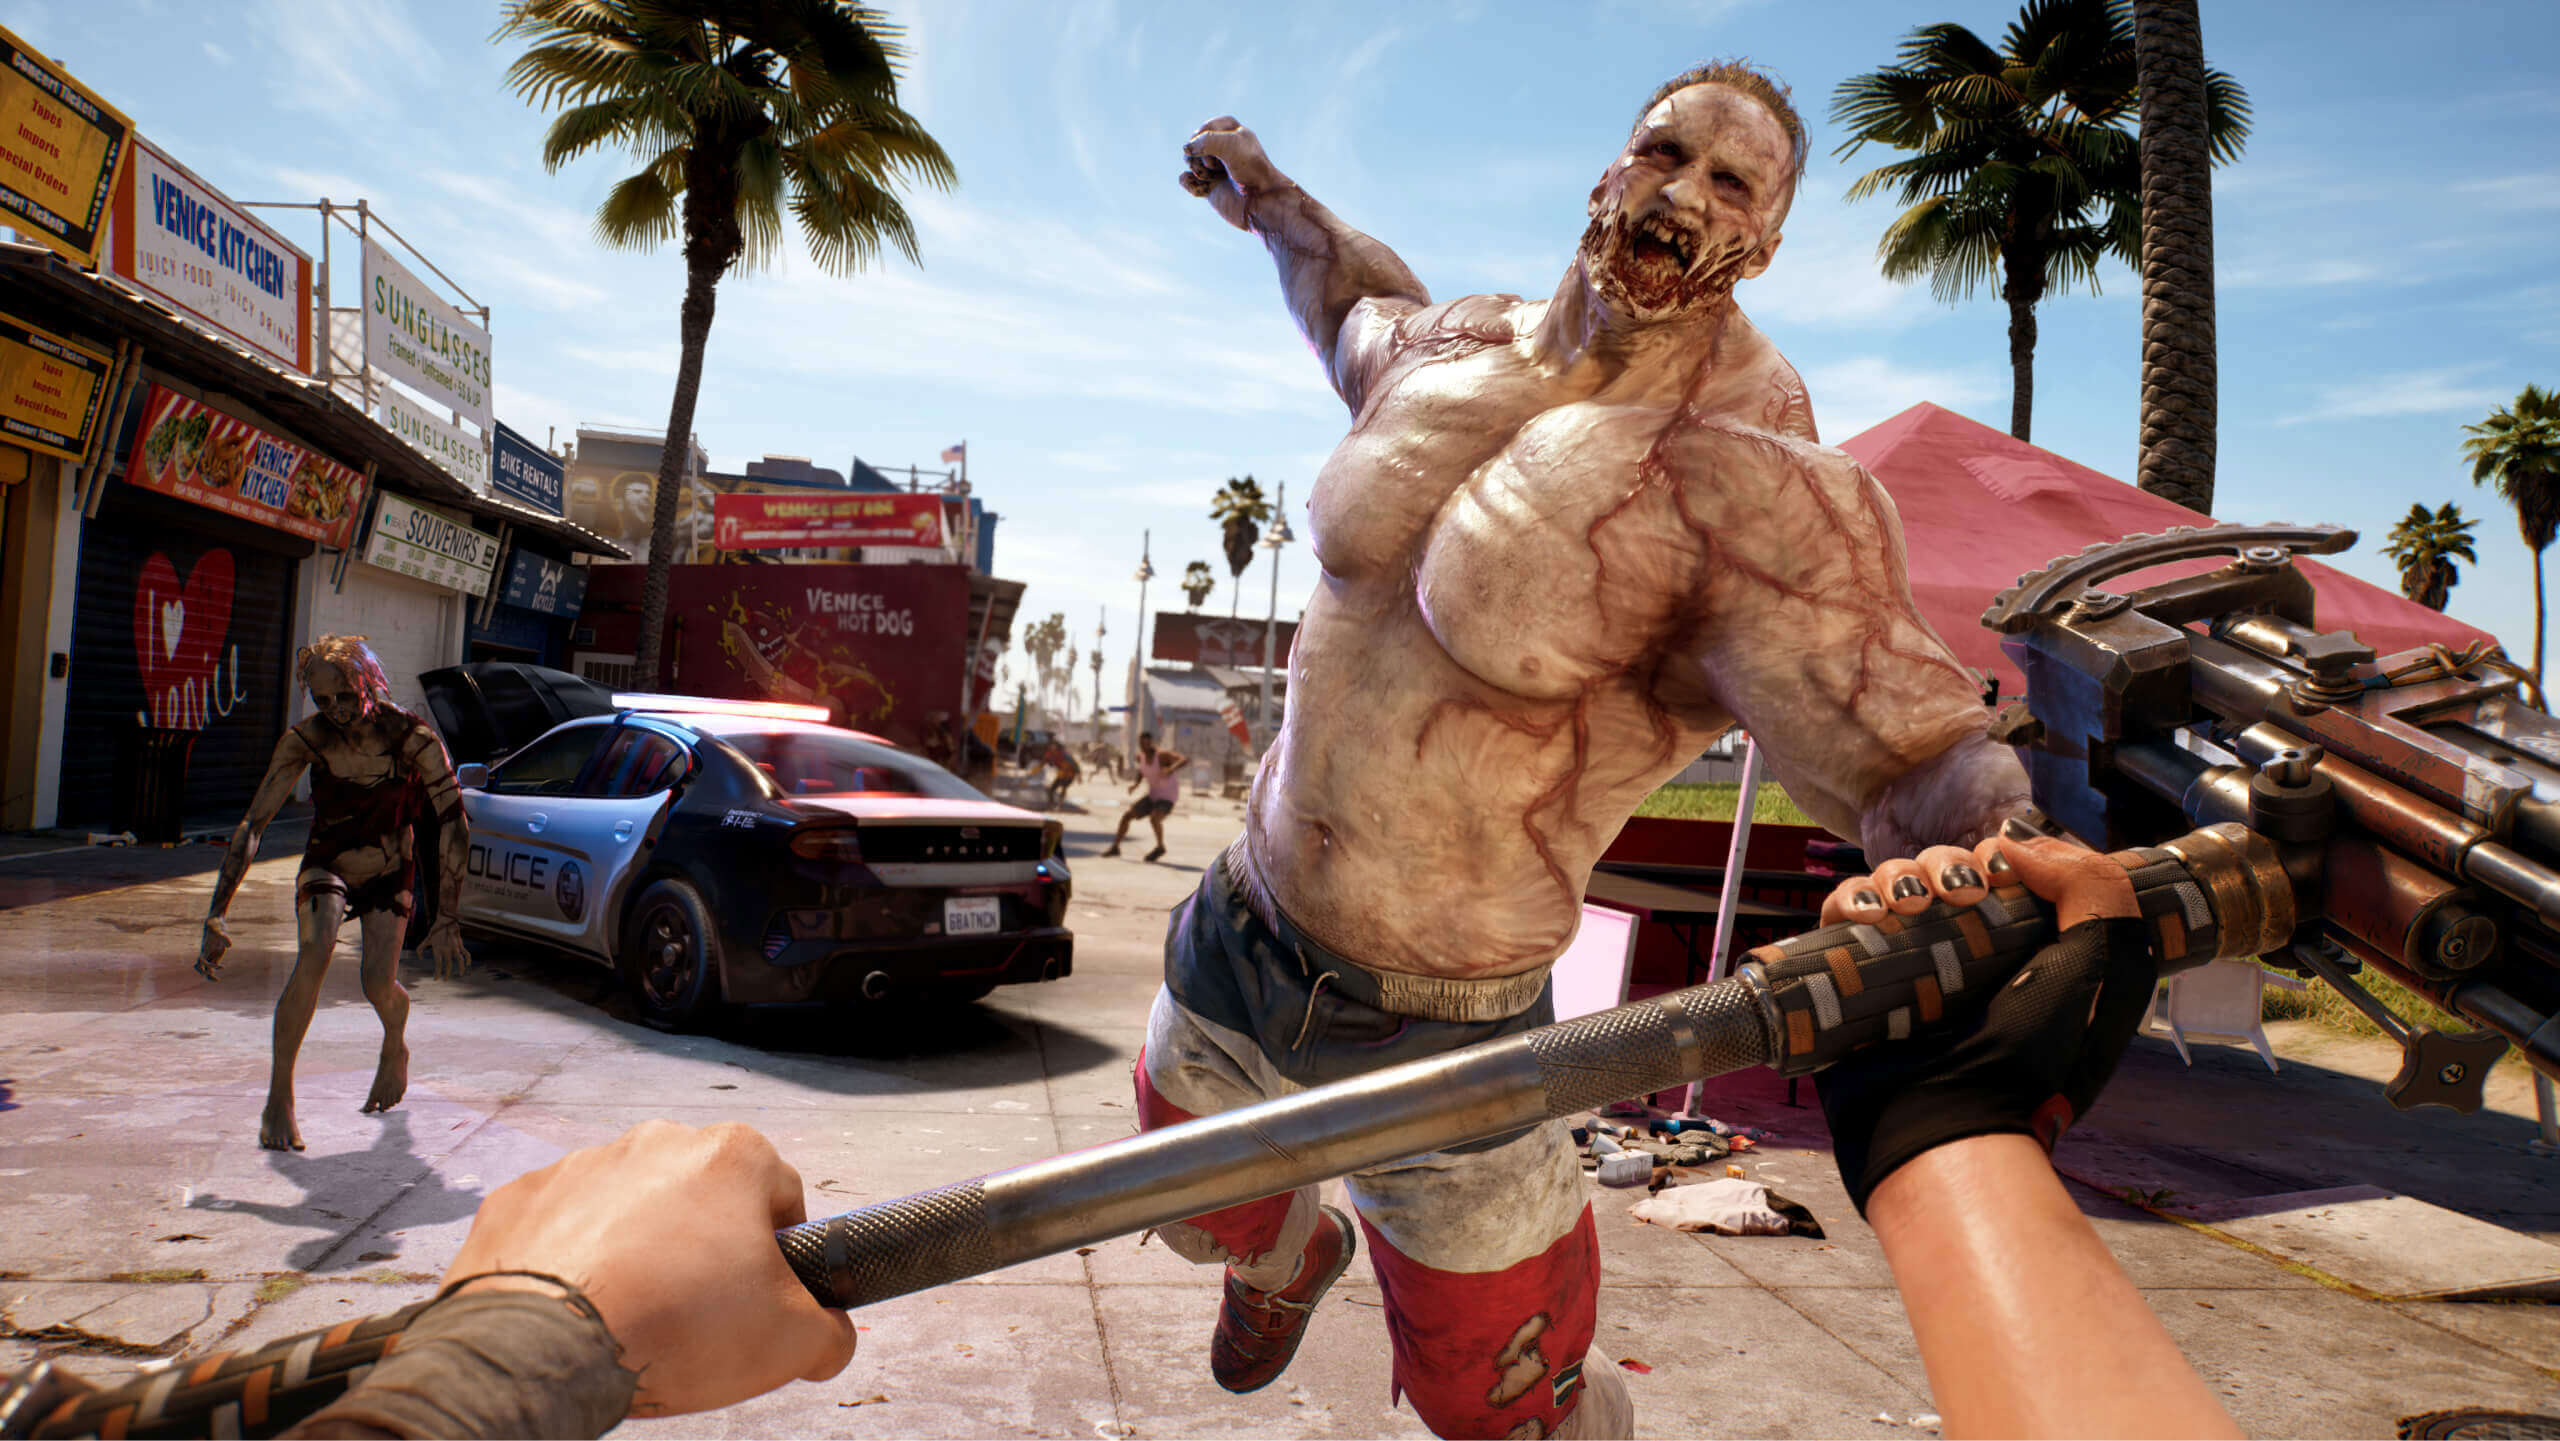 Screen shot 1 for the Dead Island 2. It shows a large undead lunging at the player who is holding a Sledge Hammer.